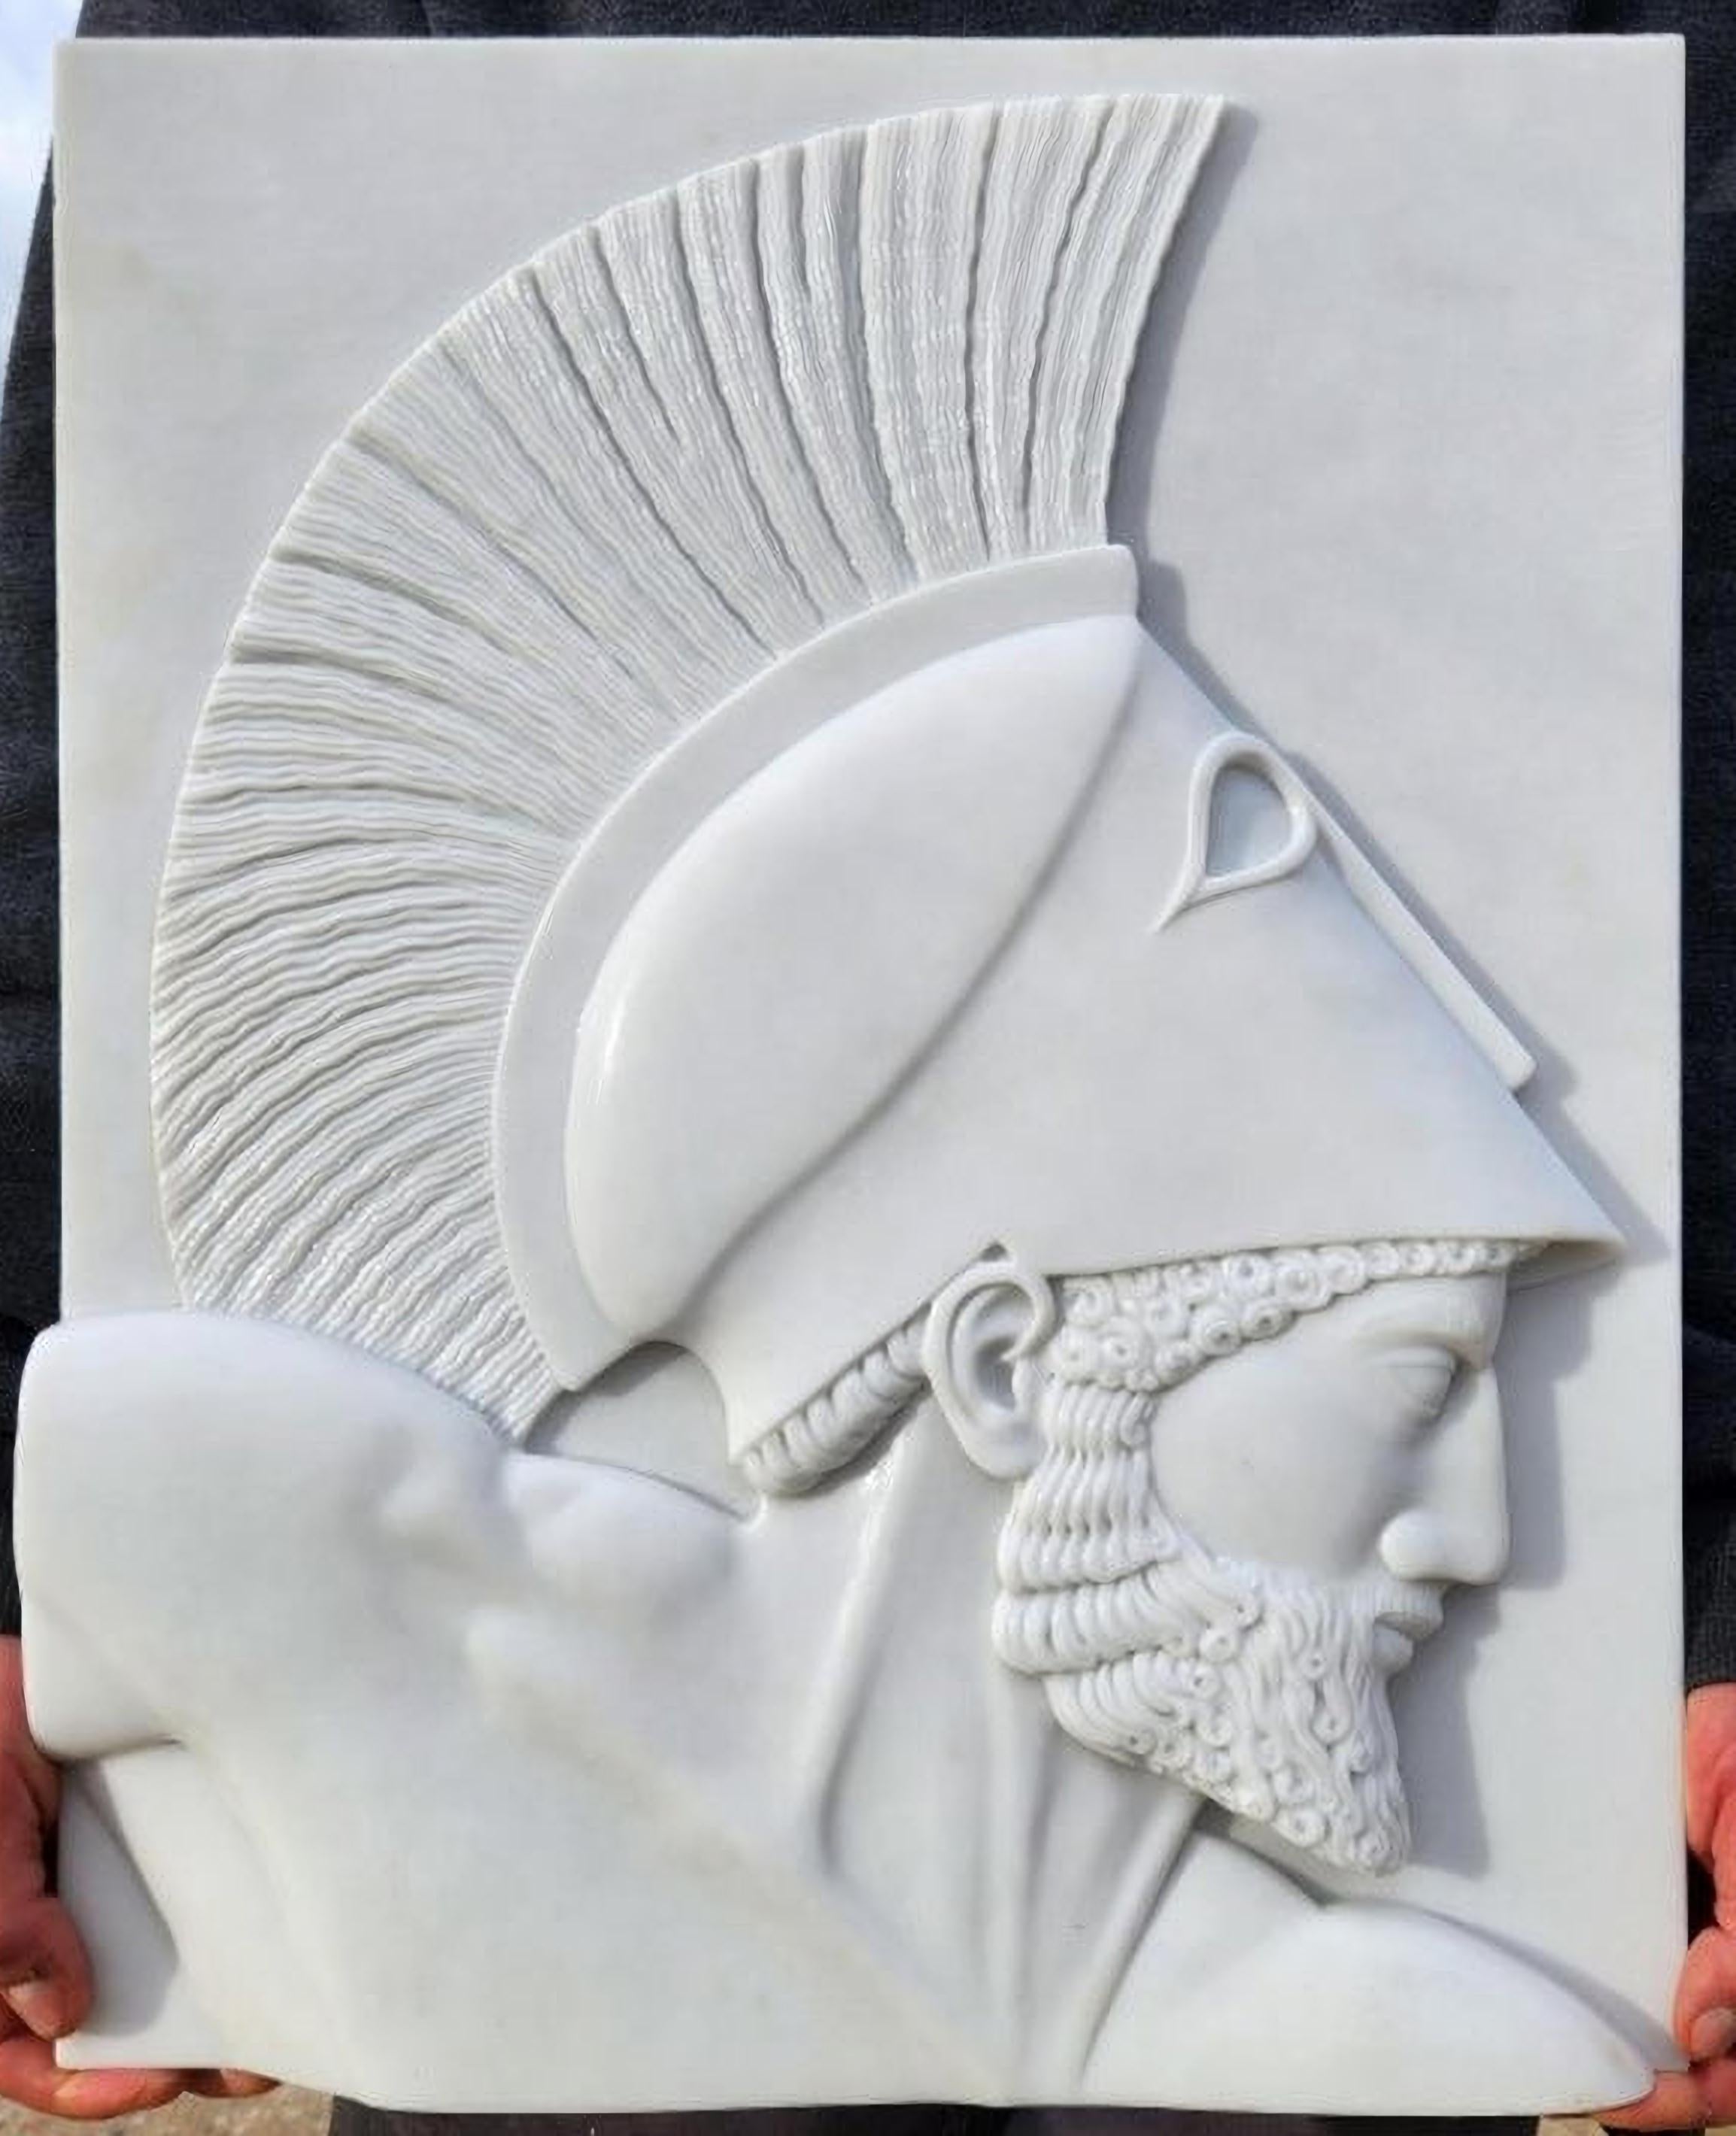 Achilles - Carrara marble bas-relief 20th century.
Italy
Measures: Height 50cm
Width 40cm
Weight 19kg
Material white carrara marble
Maximum thickness 5 cm
Perfect conditions.